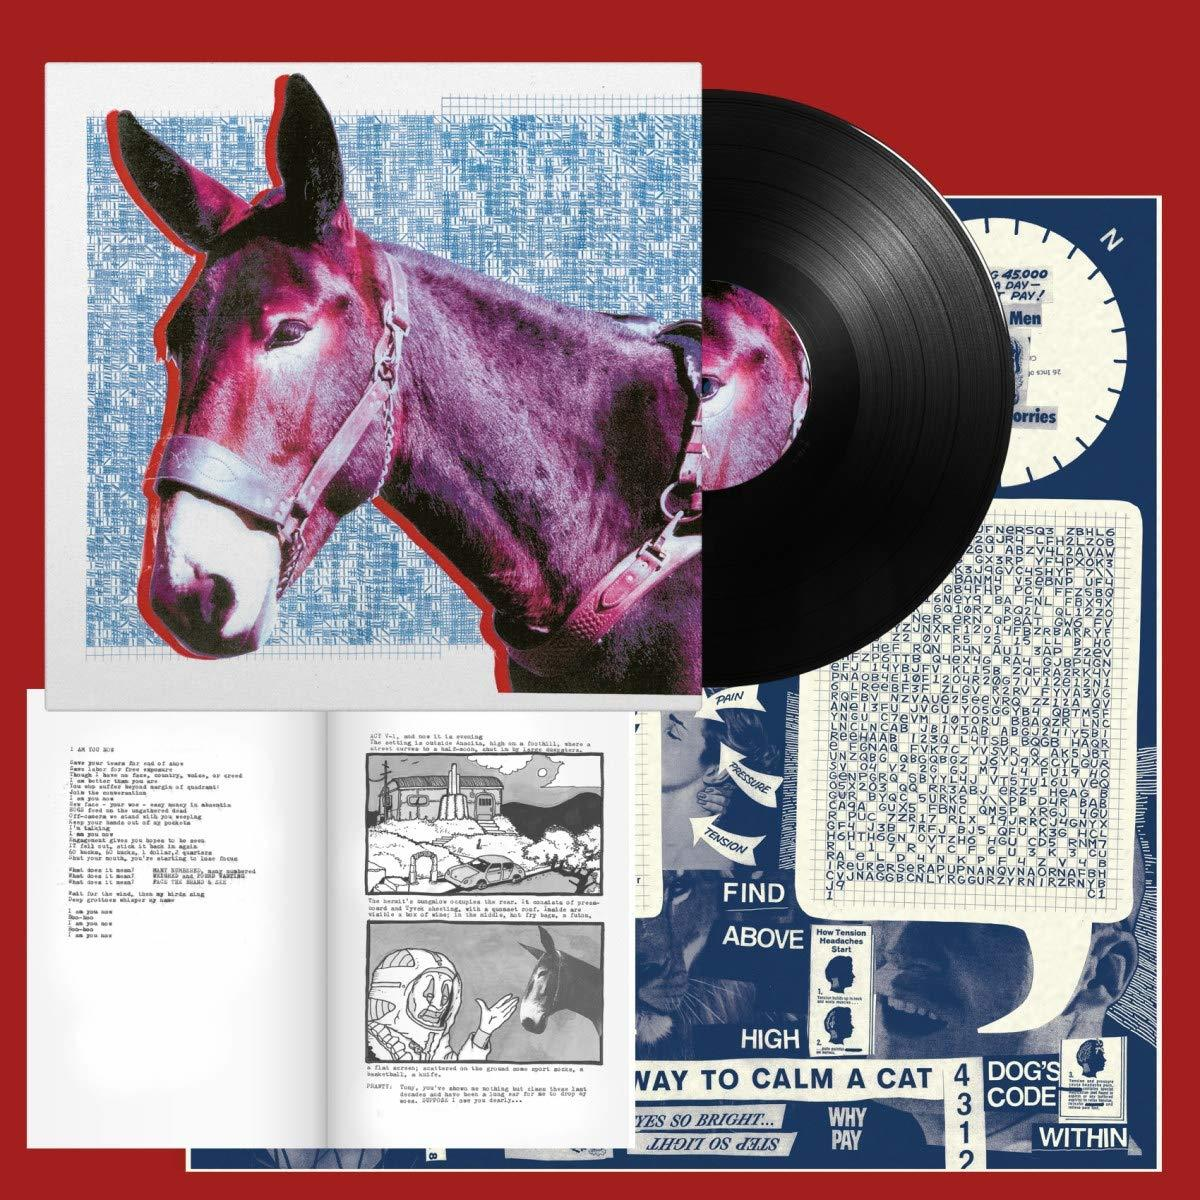 Protomartyr - ULTIMATE - + (LP (+MP3+POSTER) Download) SUCCESS TODAY